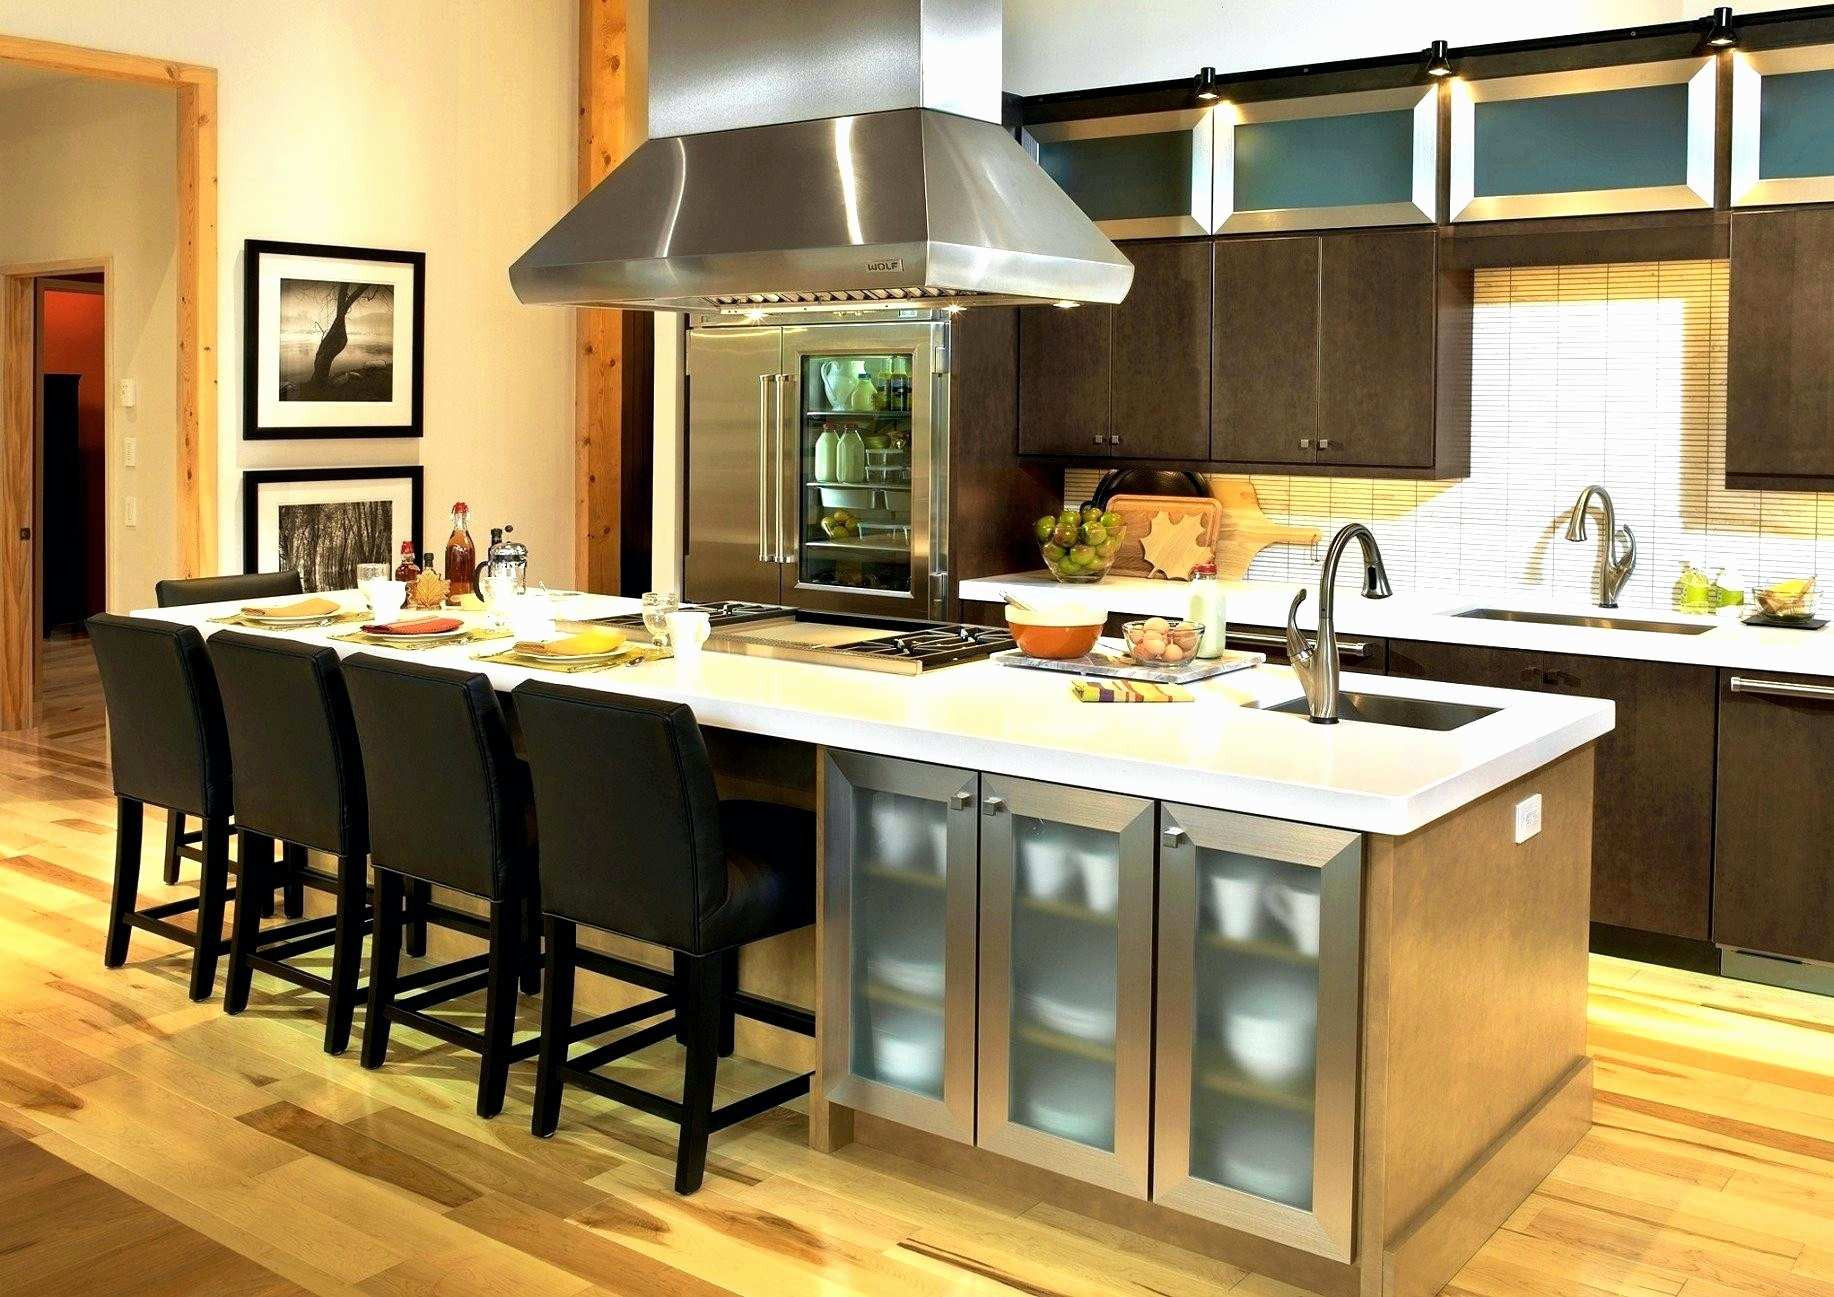 27 Spectacular Grey Hardwood Floors 2024 free download grey hardwood floors of 47 new light grey kitchen cabinets graphics living room decor ideas regarding kitchen island with stove awesome kitchen island designs new slbss8h sink dishwasher bo 